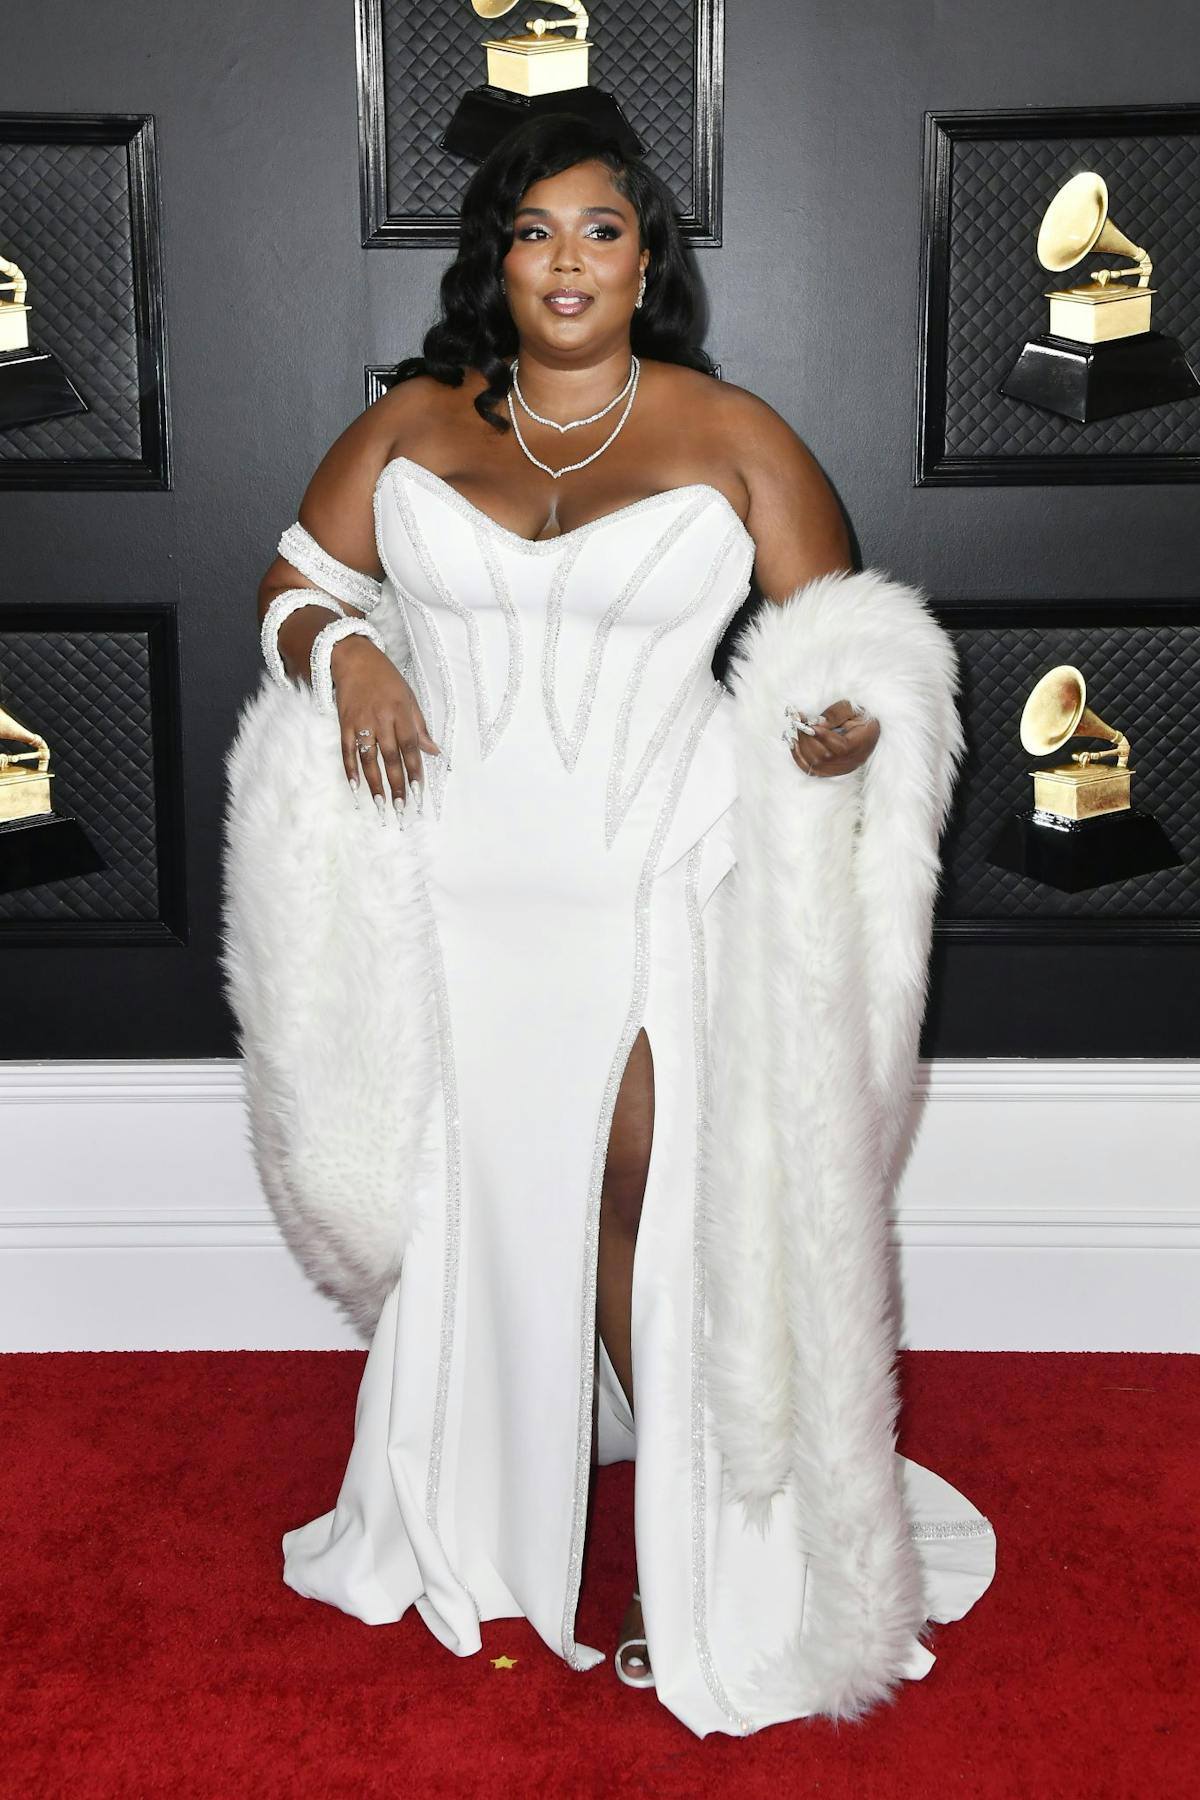 Grammys 2020 All The Best Red Carpet Looks